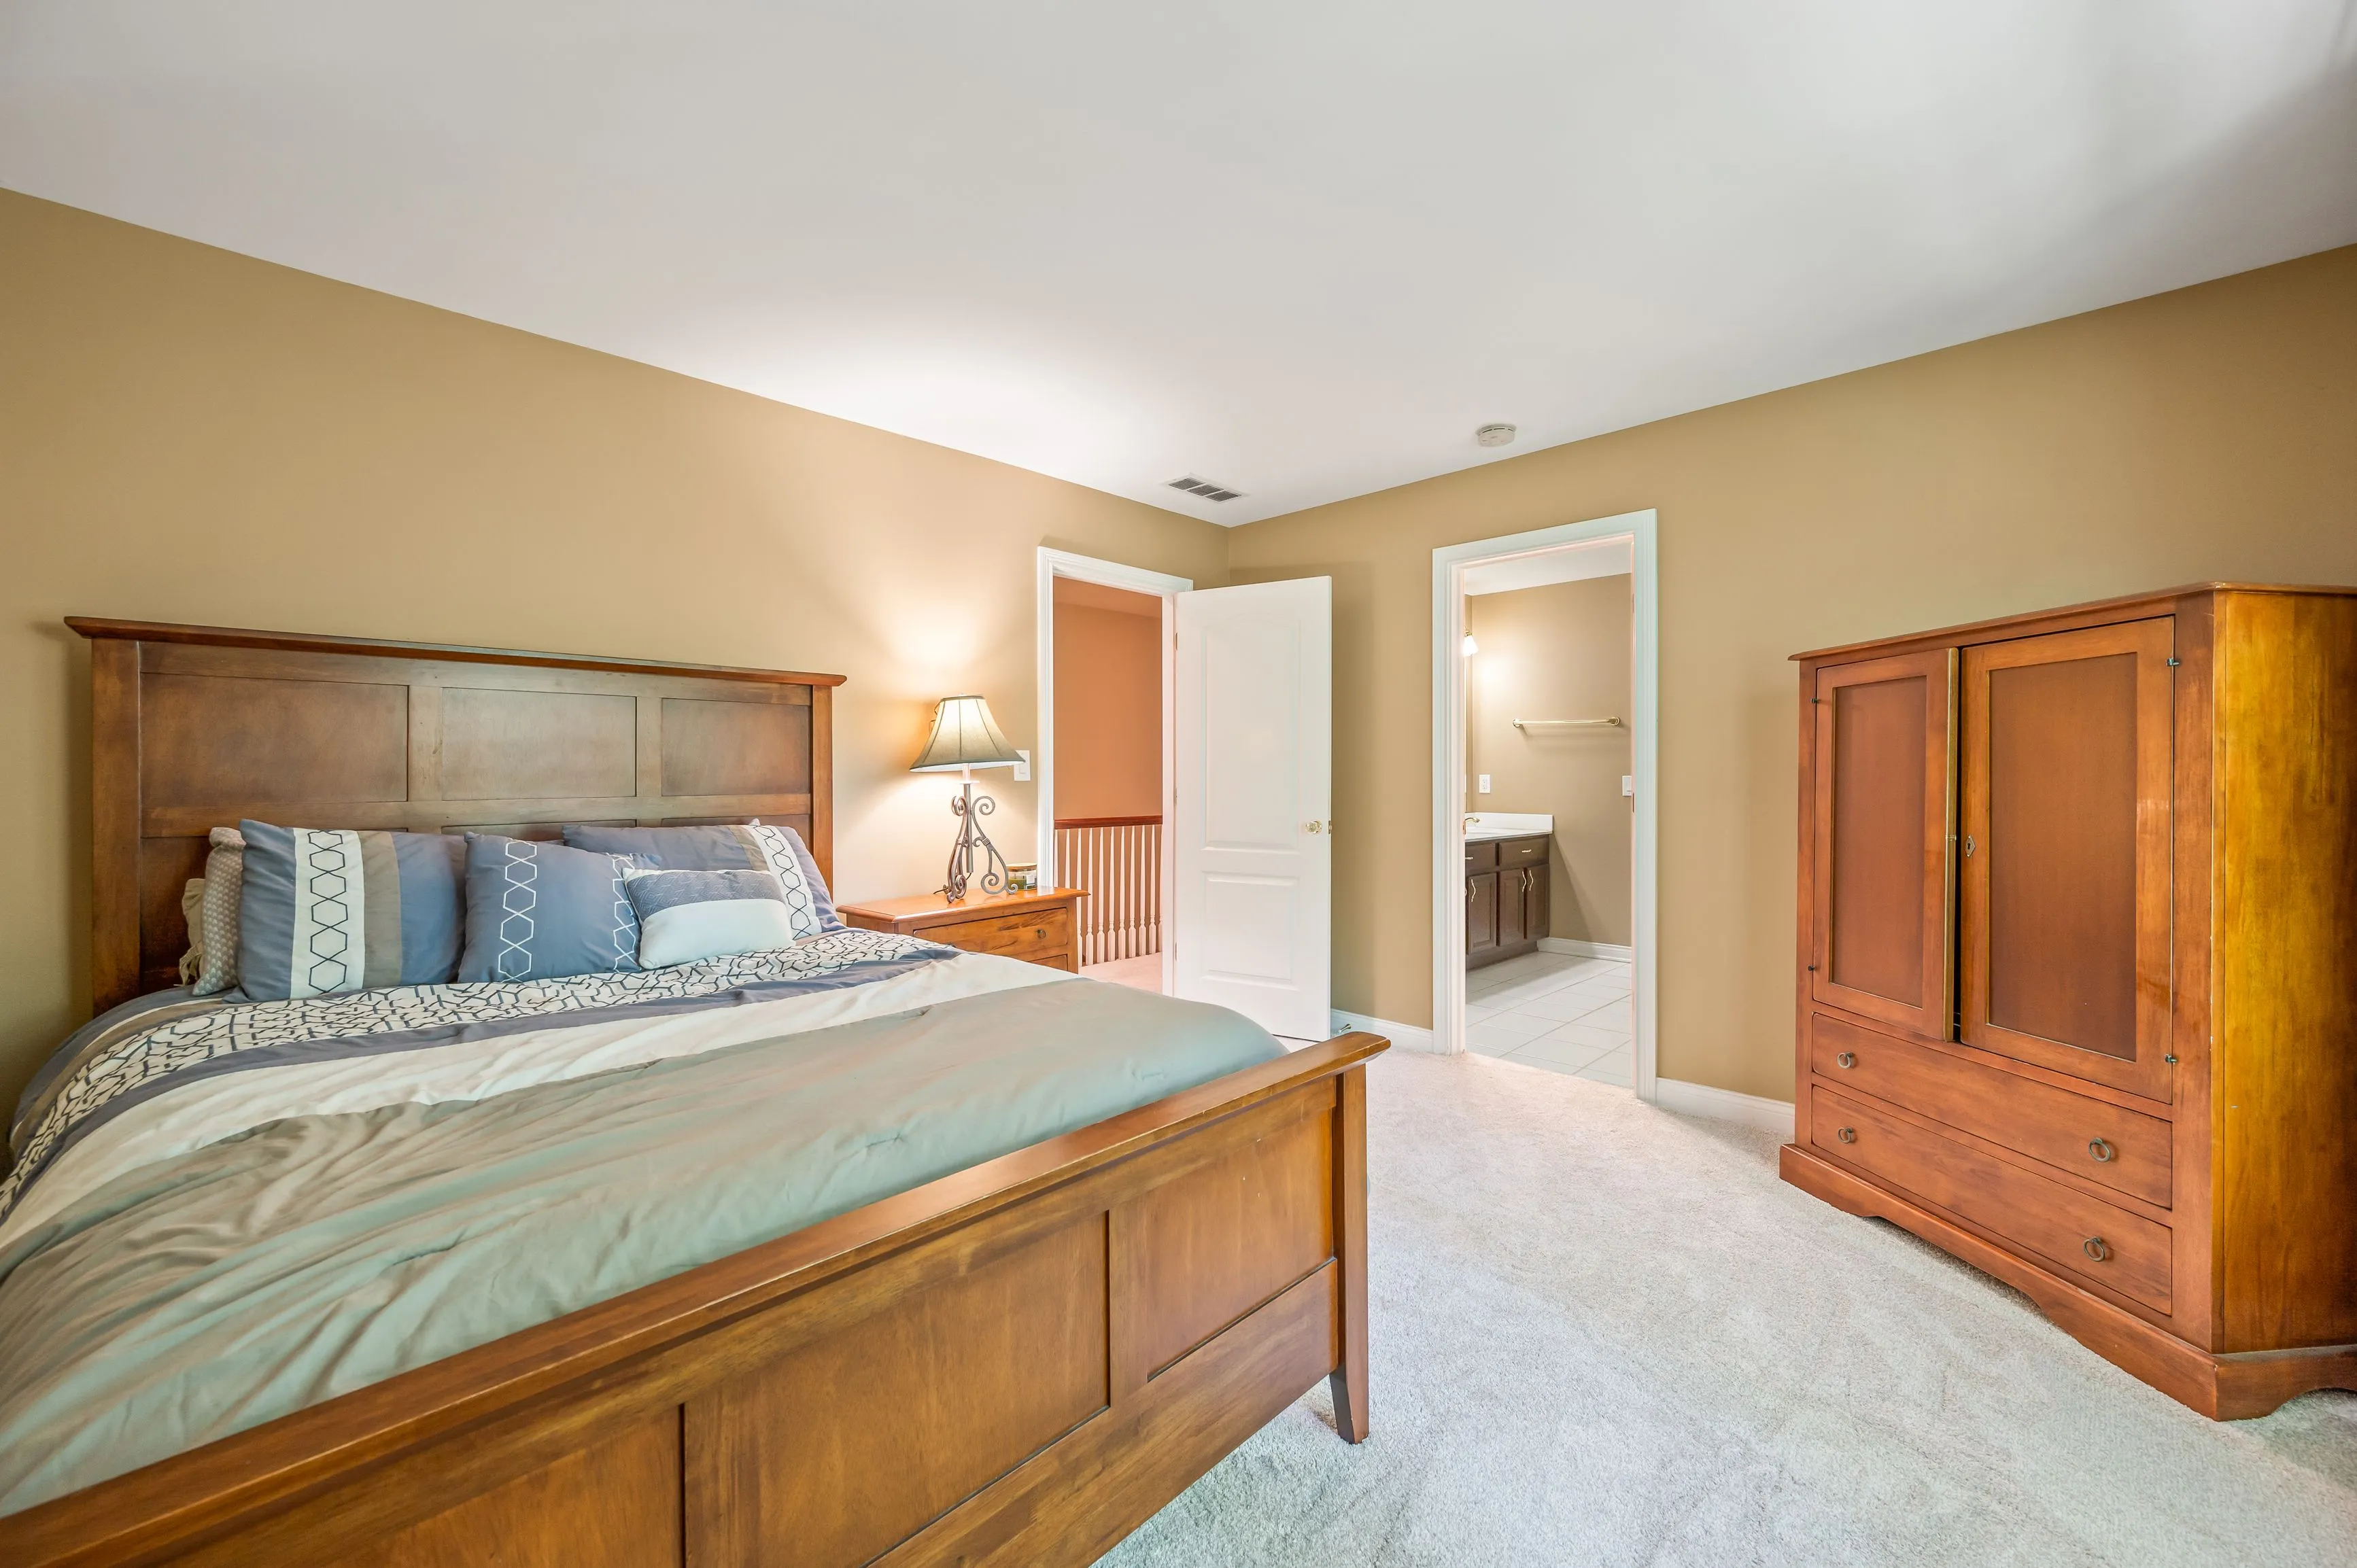 Spacious bedroom with large bed, wooden furniture, and open doors leading to another room.